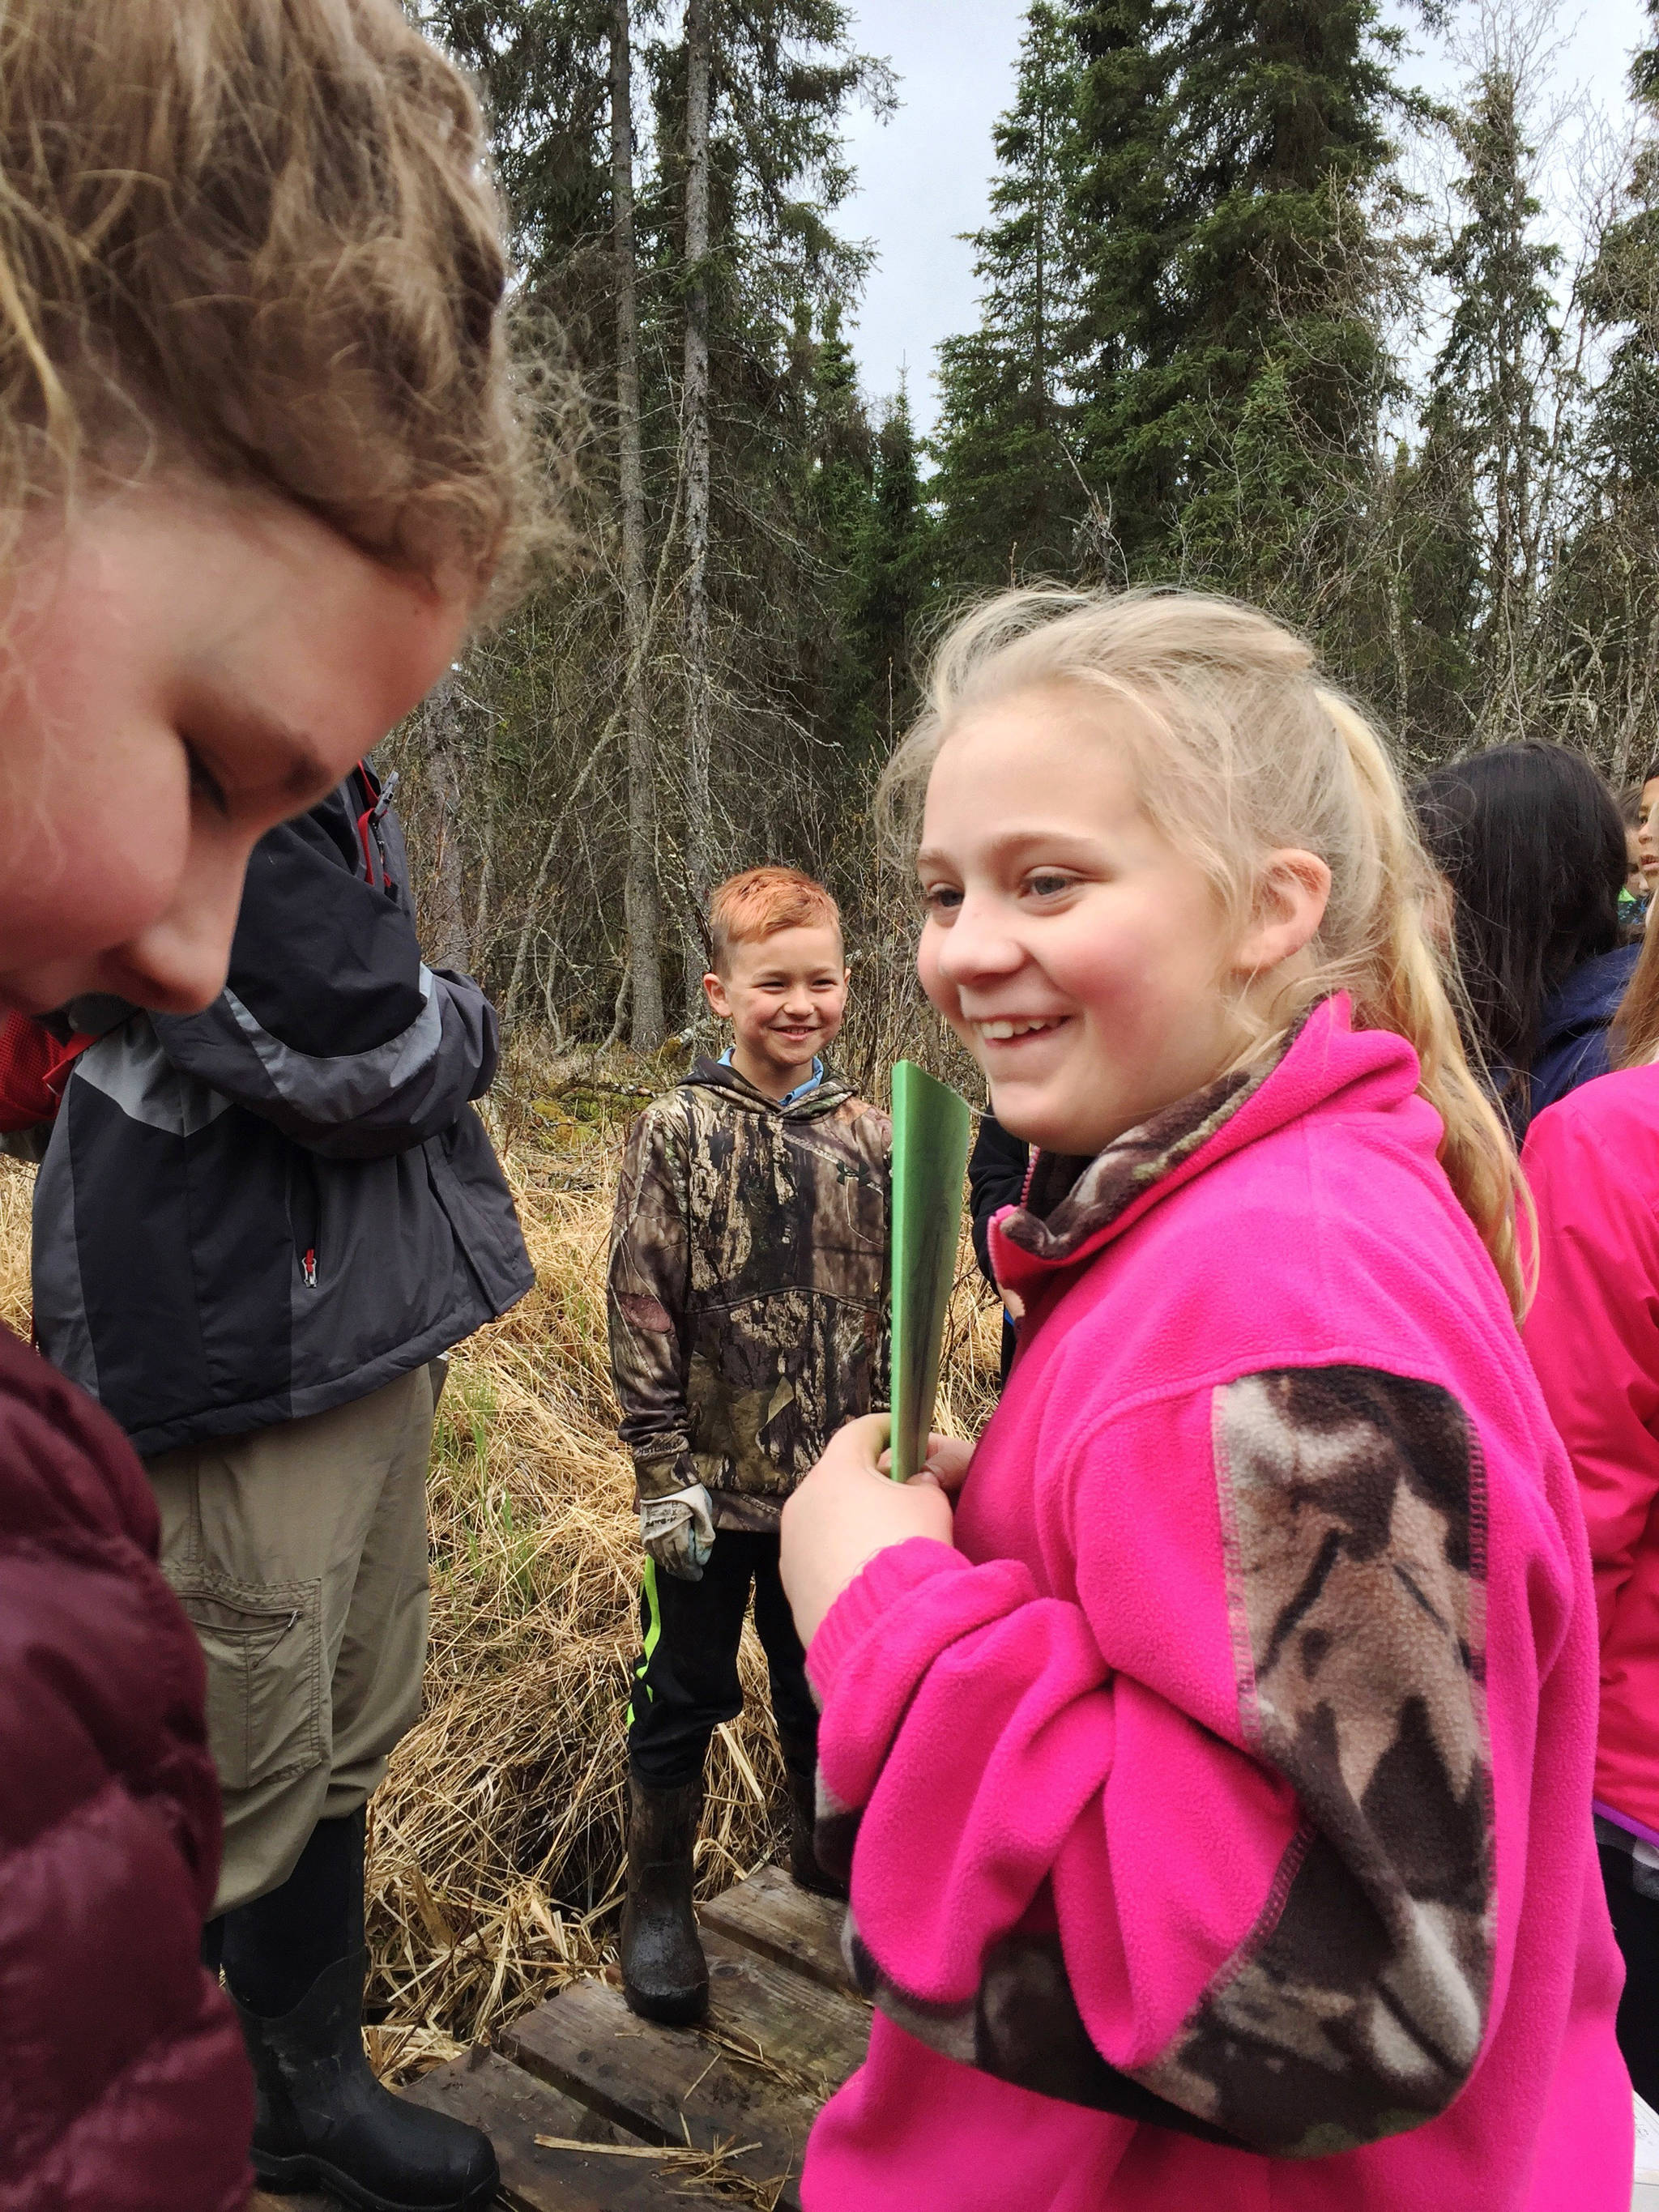 Kalifornsky Beach Elementary School fifth grade students Kennedy Whitney (left), Marshal Burnett (center) and Alyssa McDonald (center) work together to distribute plant identification signs they made on a trail near the school on Friday, May 18, 2018 near Soldotna, Alaska. The class worked with the Kenai Watershed Forum this year to improve the trail and place plant identification signs along it. (Photo by Elizabeth Earl/Peninsula Clarion)